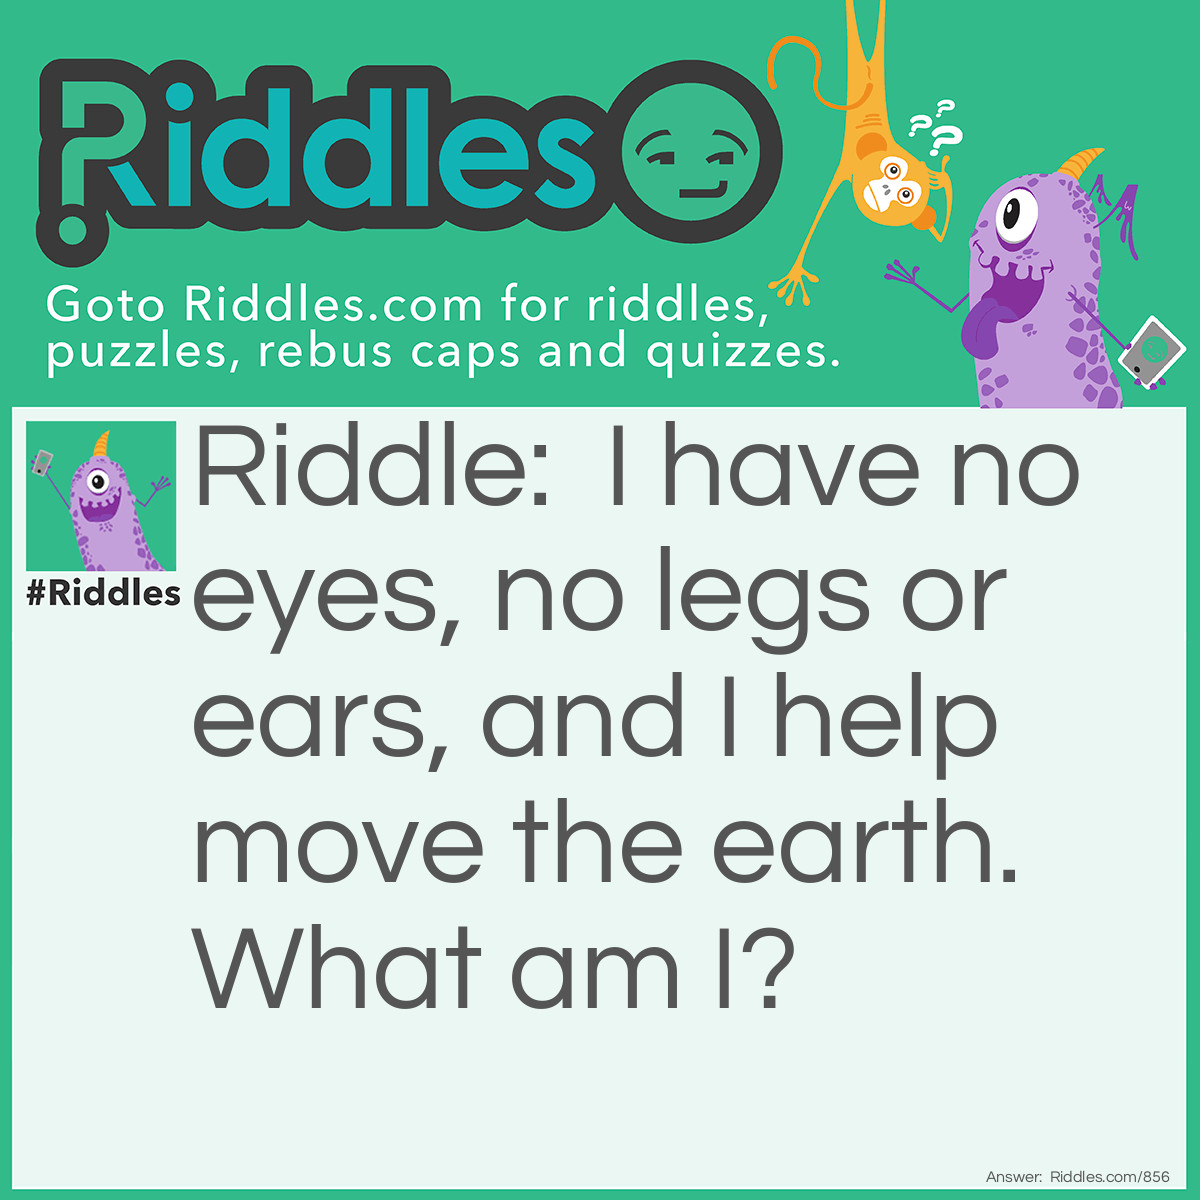 Riddle: I have no eyes, no legs or ears, and I help move the earth. 
What am I? Answer: A worm.